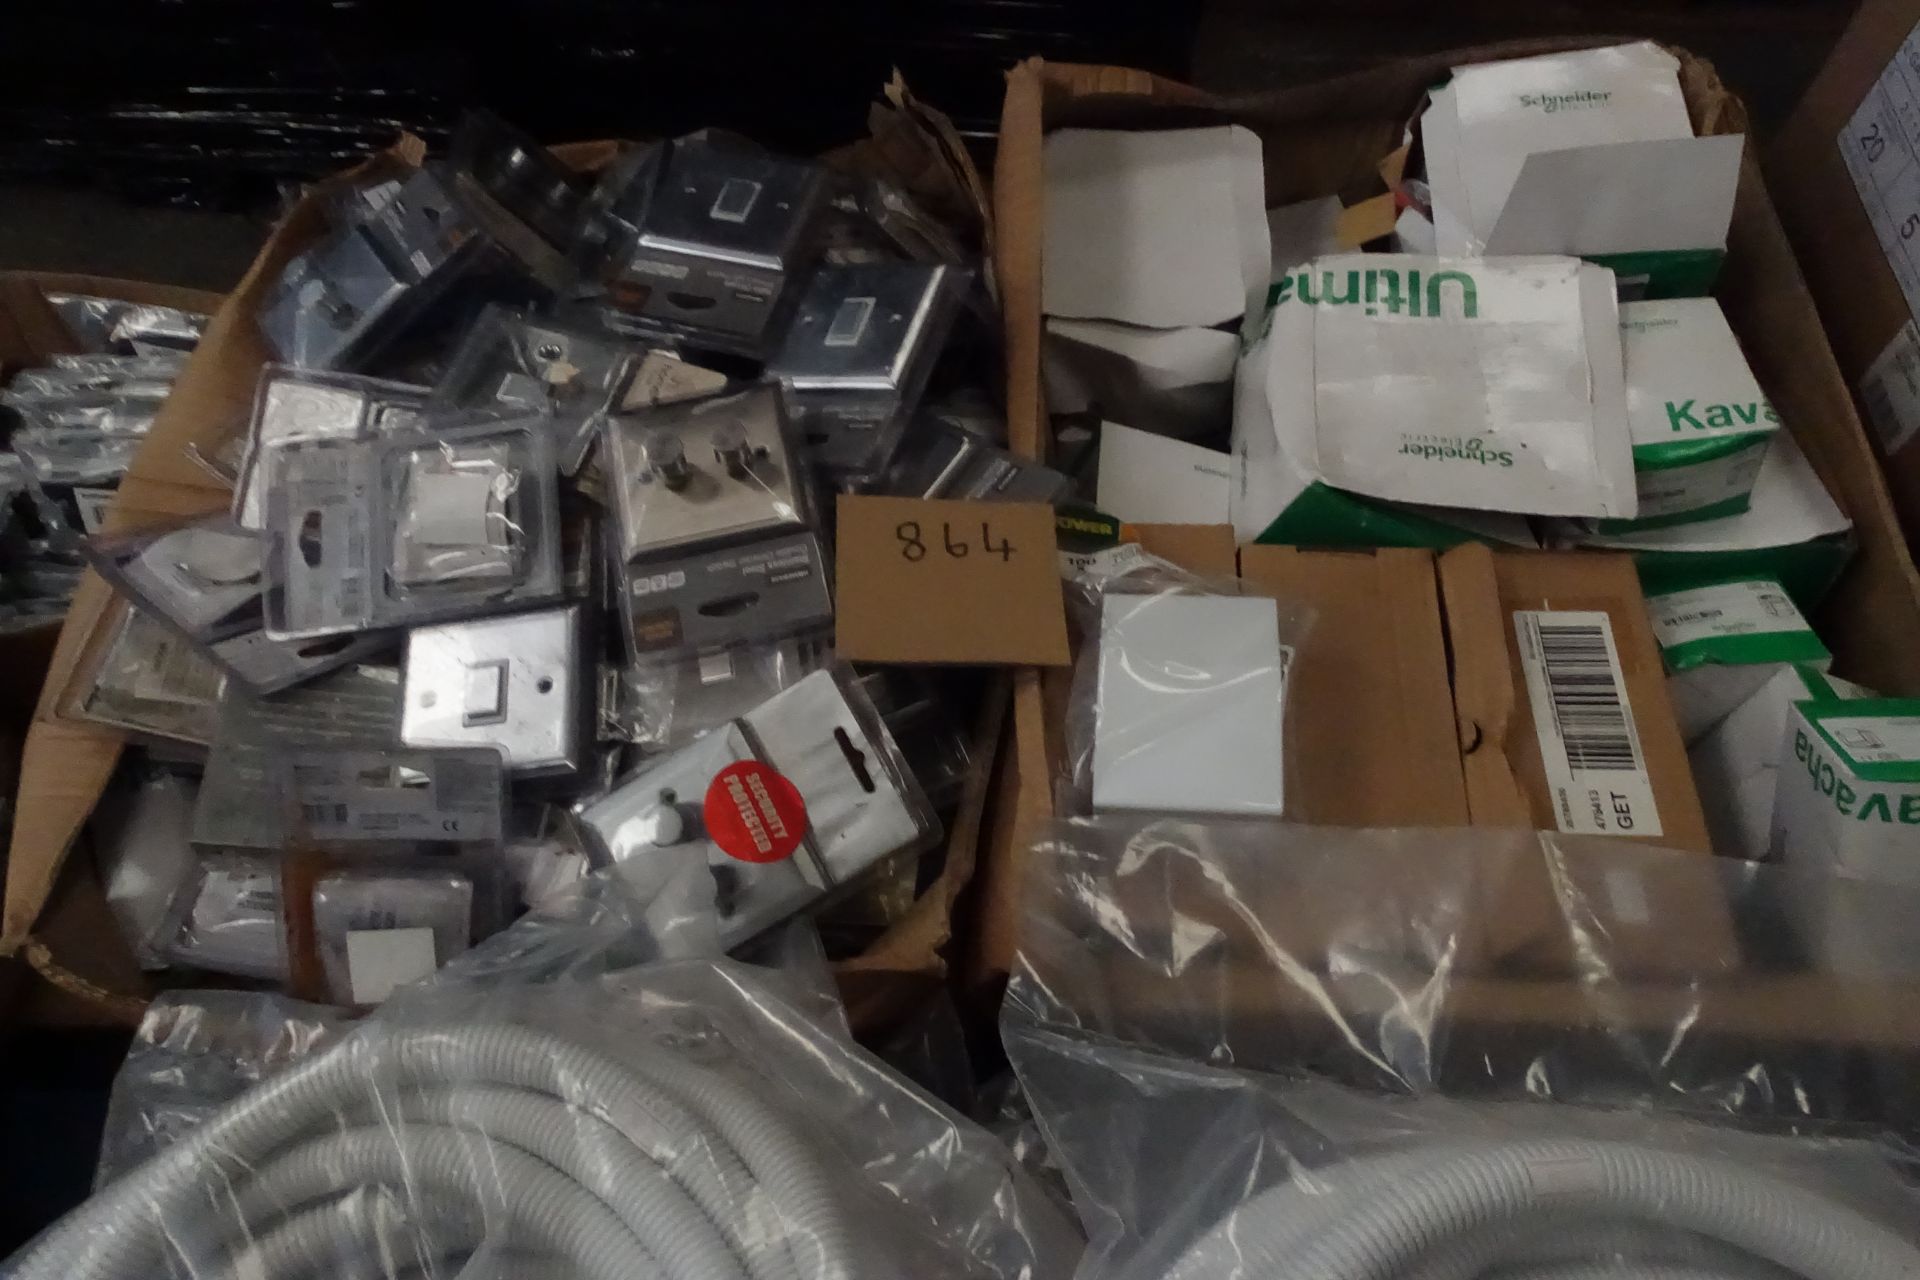 2 X Boxes of Mixed Switches + Sockets Approx 280+